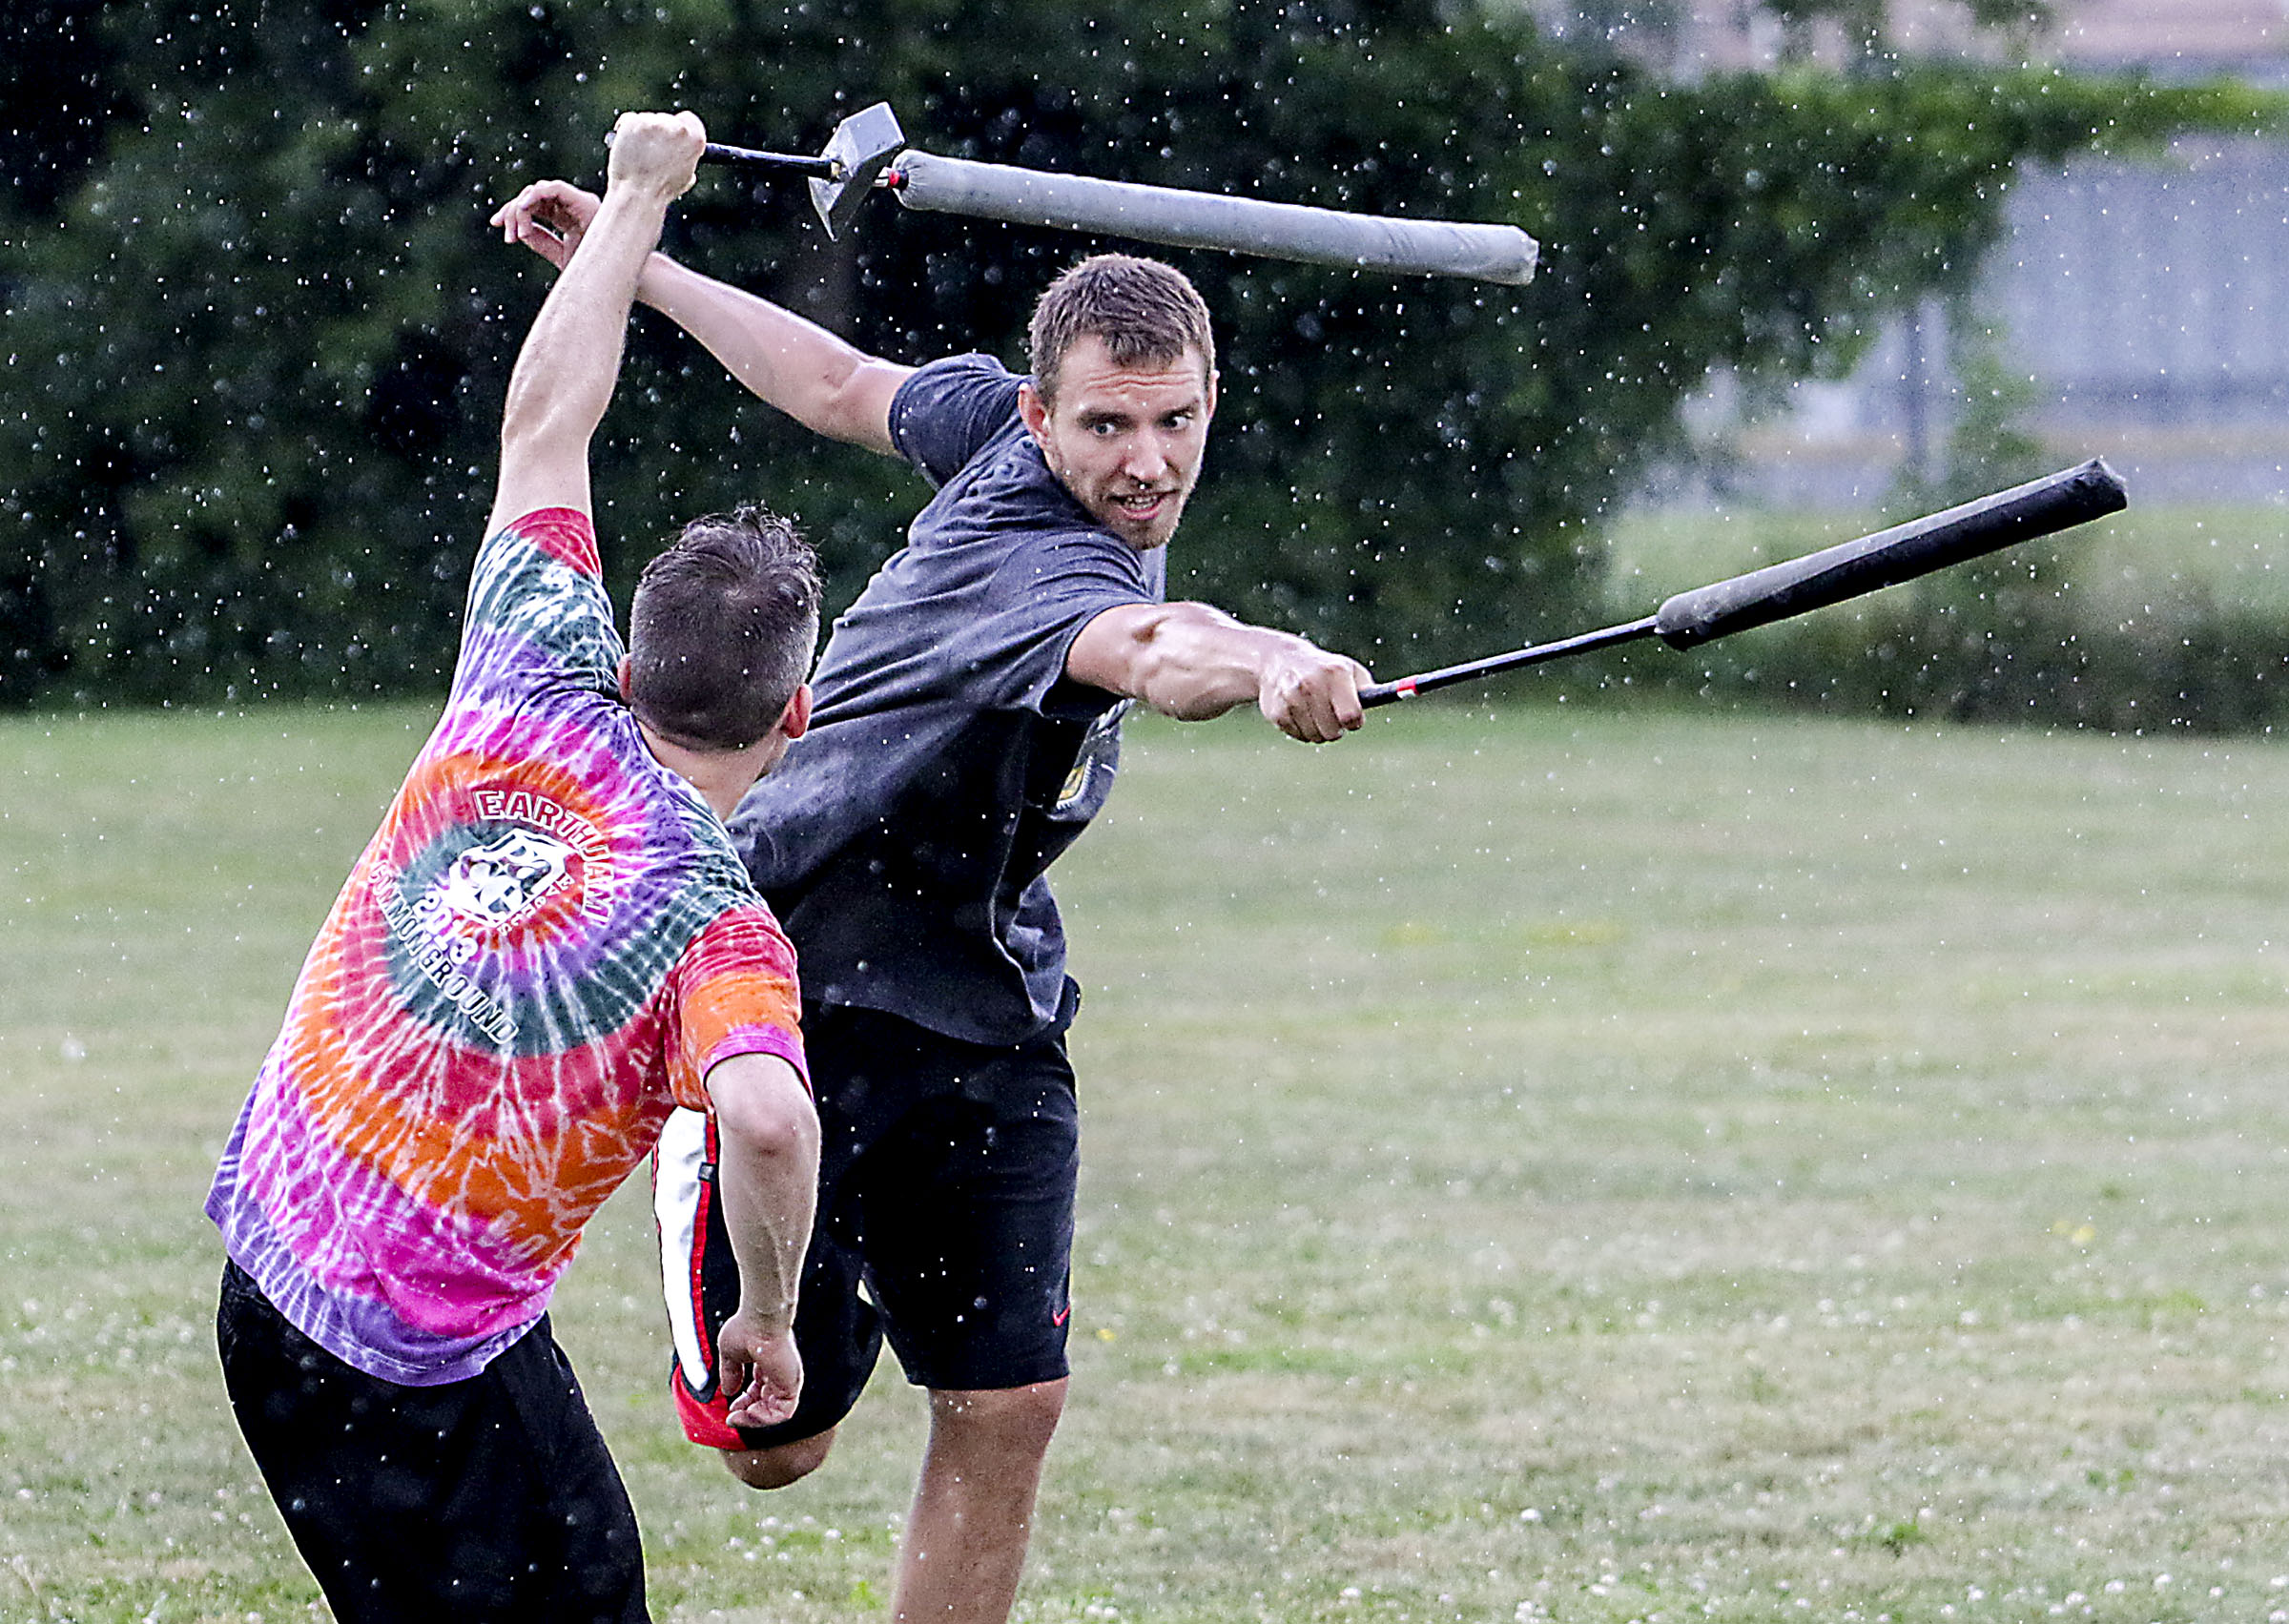  Conner Torrey keeps an eye on his opponent Seth Hurney as they practice LARPing, in the field nearby Eldrige Park in Lebanon, N.H. The two compete in the LARPing organization known as Realms and use bamboo-core weapons for increased speed and compet